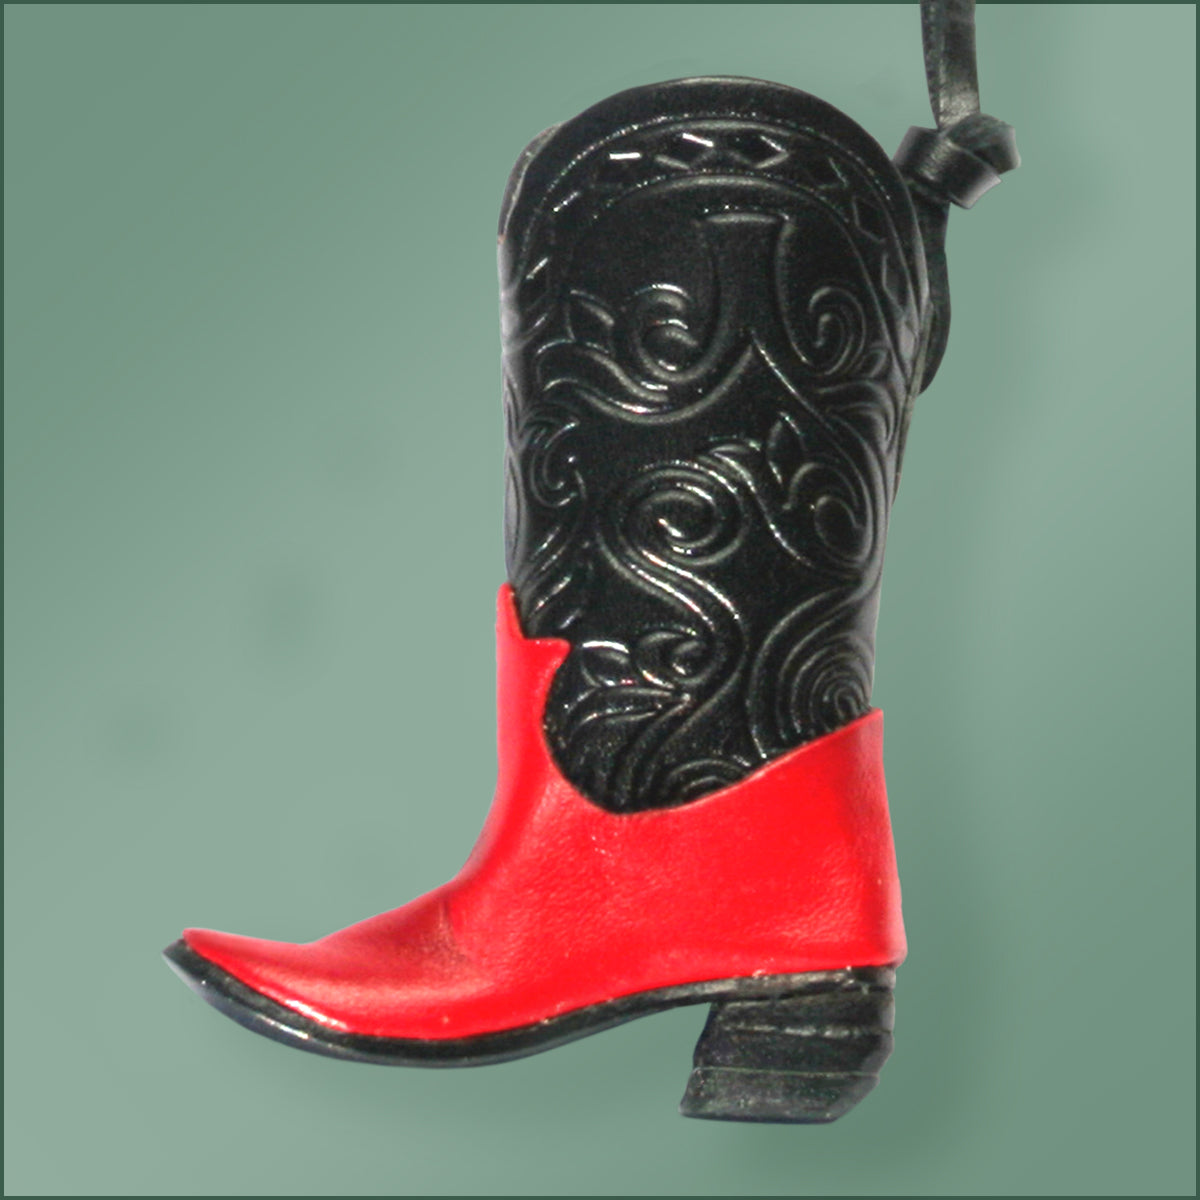 Leather Cowboy Boot Ornament - Black/Red